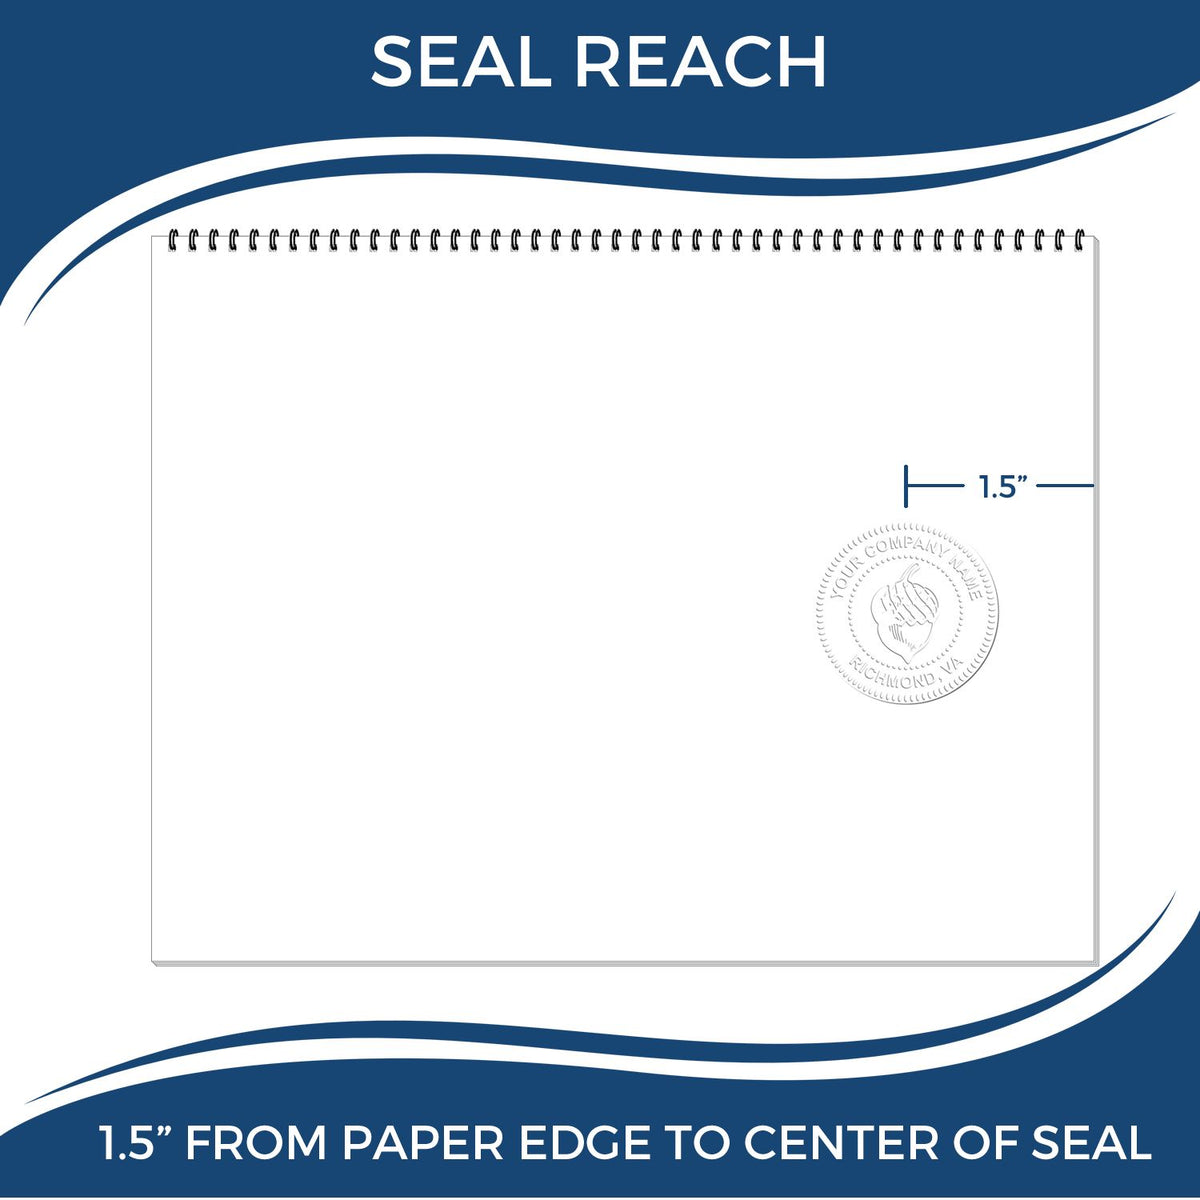 An infographic showing the seal reach which is represented by a ruler and a miniature seal image of the Handheld North Dakota Architect Seal Embosser